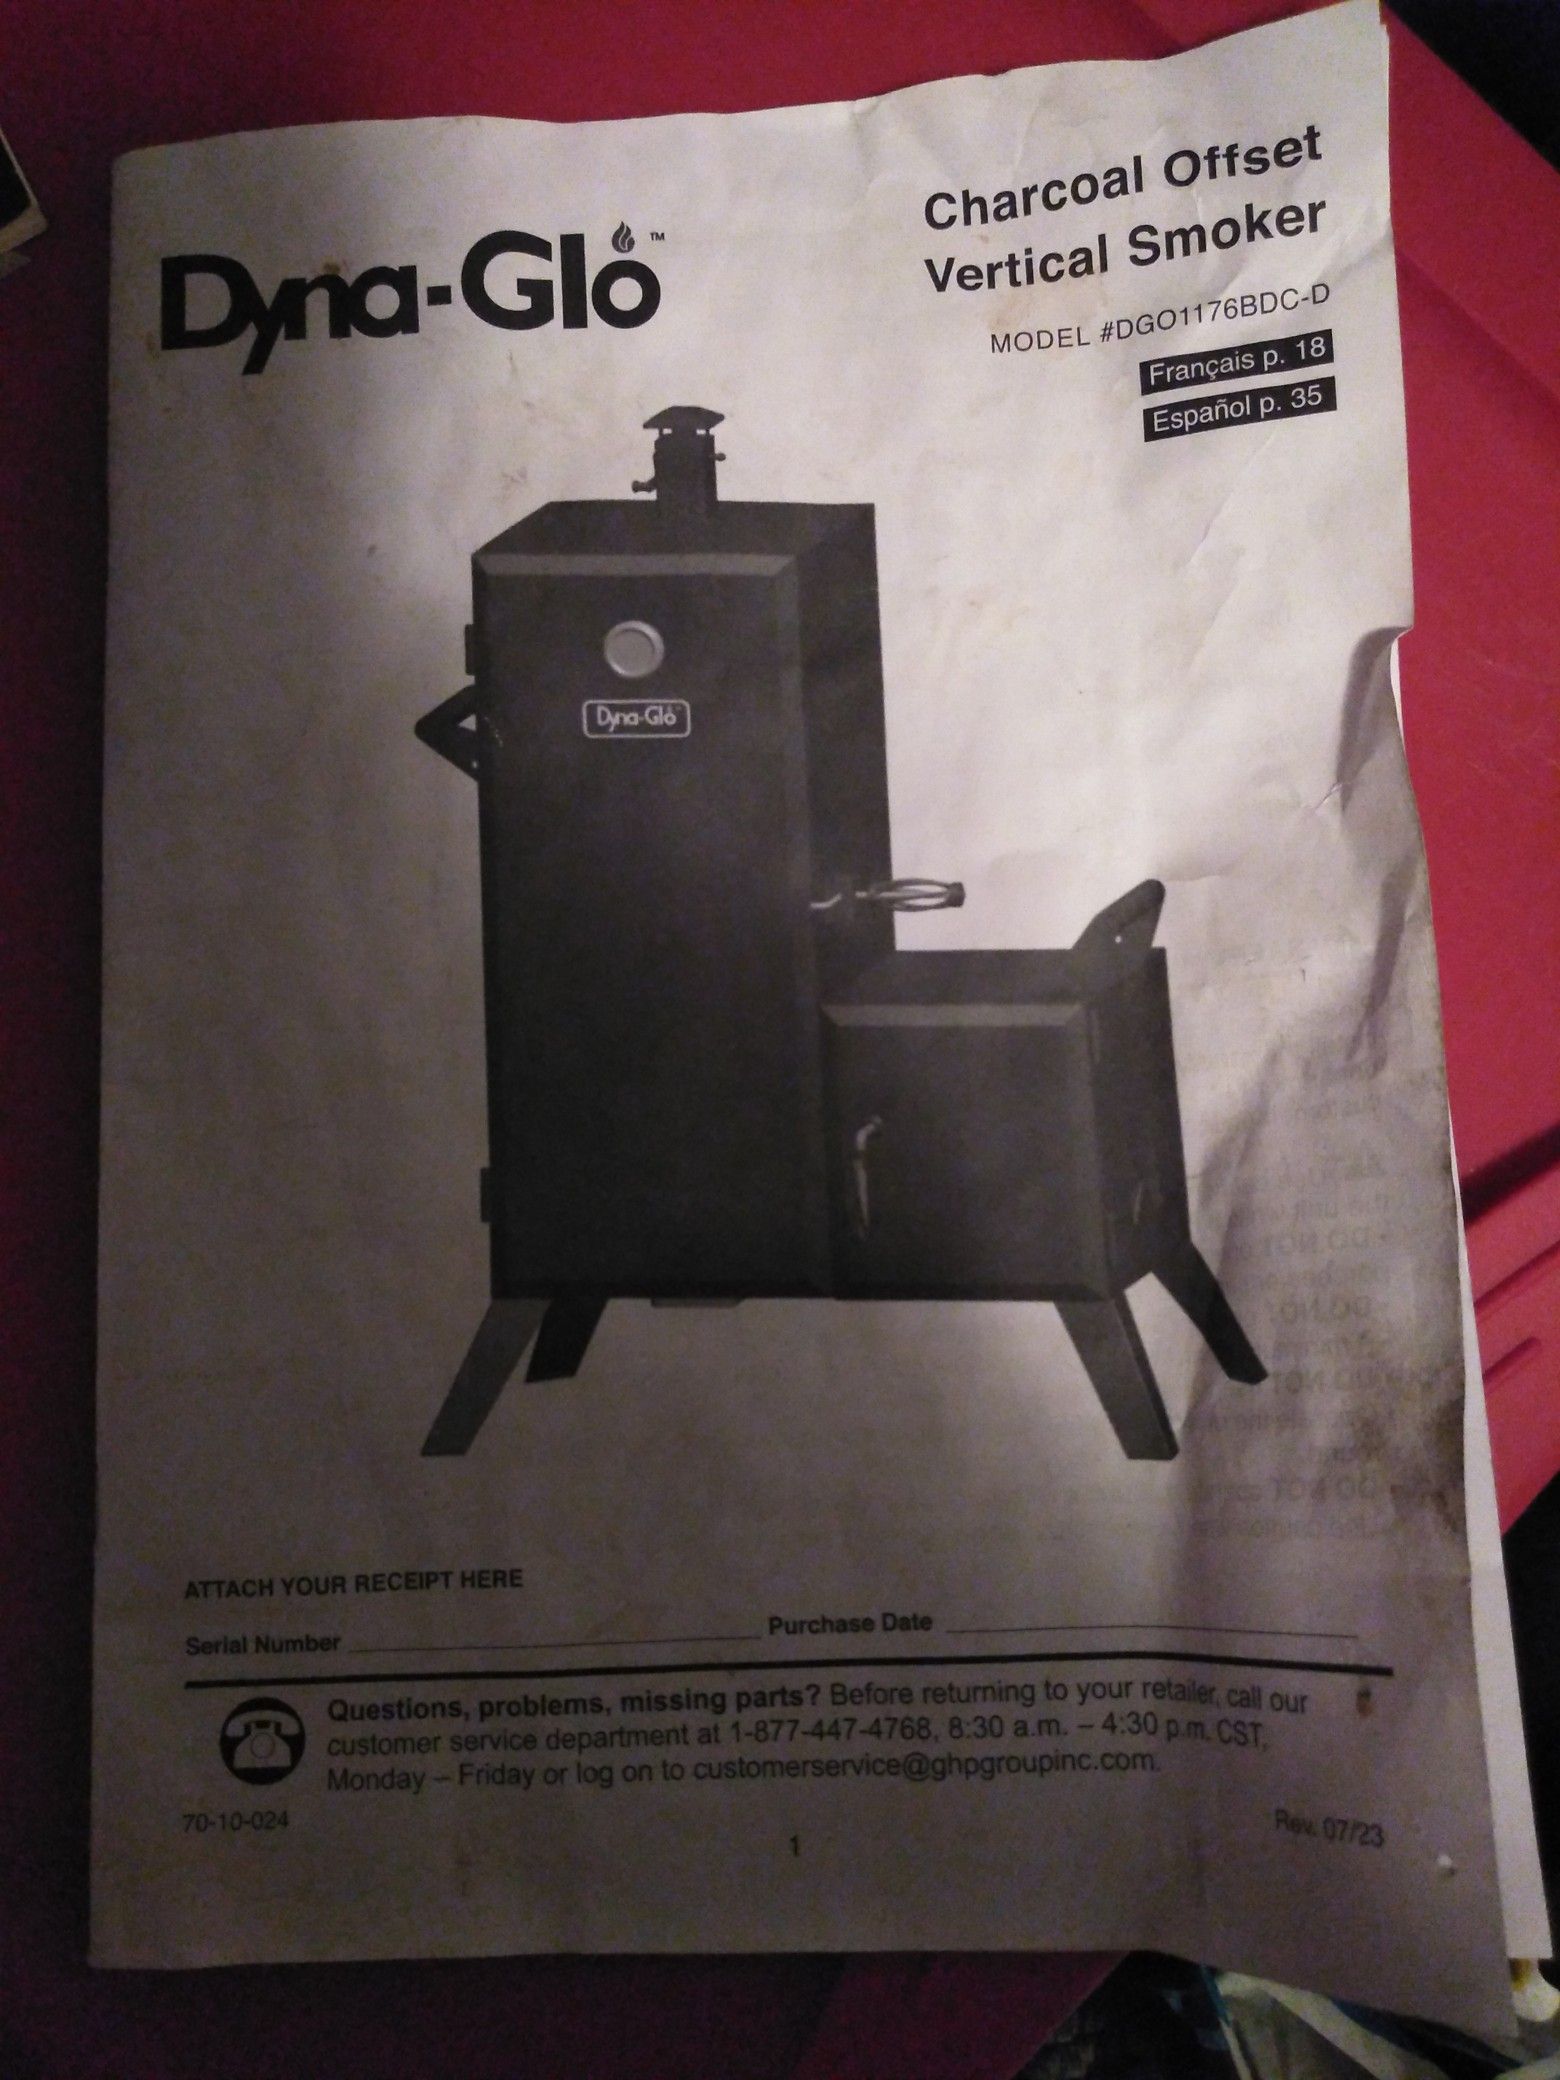 Dyna-Glo charcoal offset vertical smoker brand new in the box